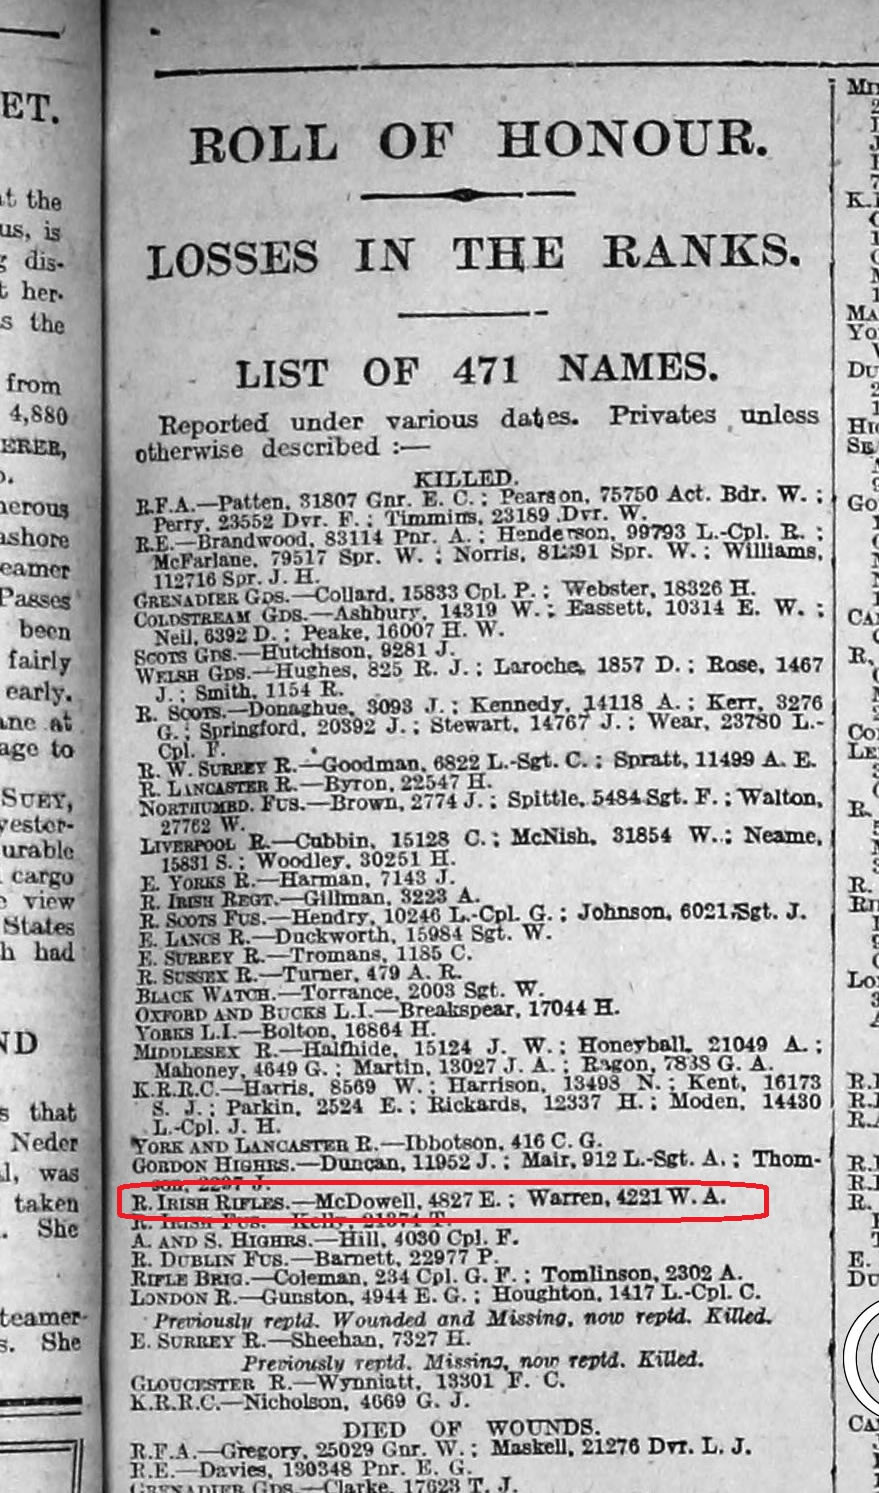 Casualty Records for July 11, 1916 in the Military records on TheGenealogist reports E McDowell as Killed in Action.